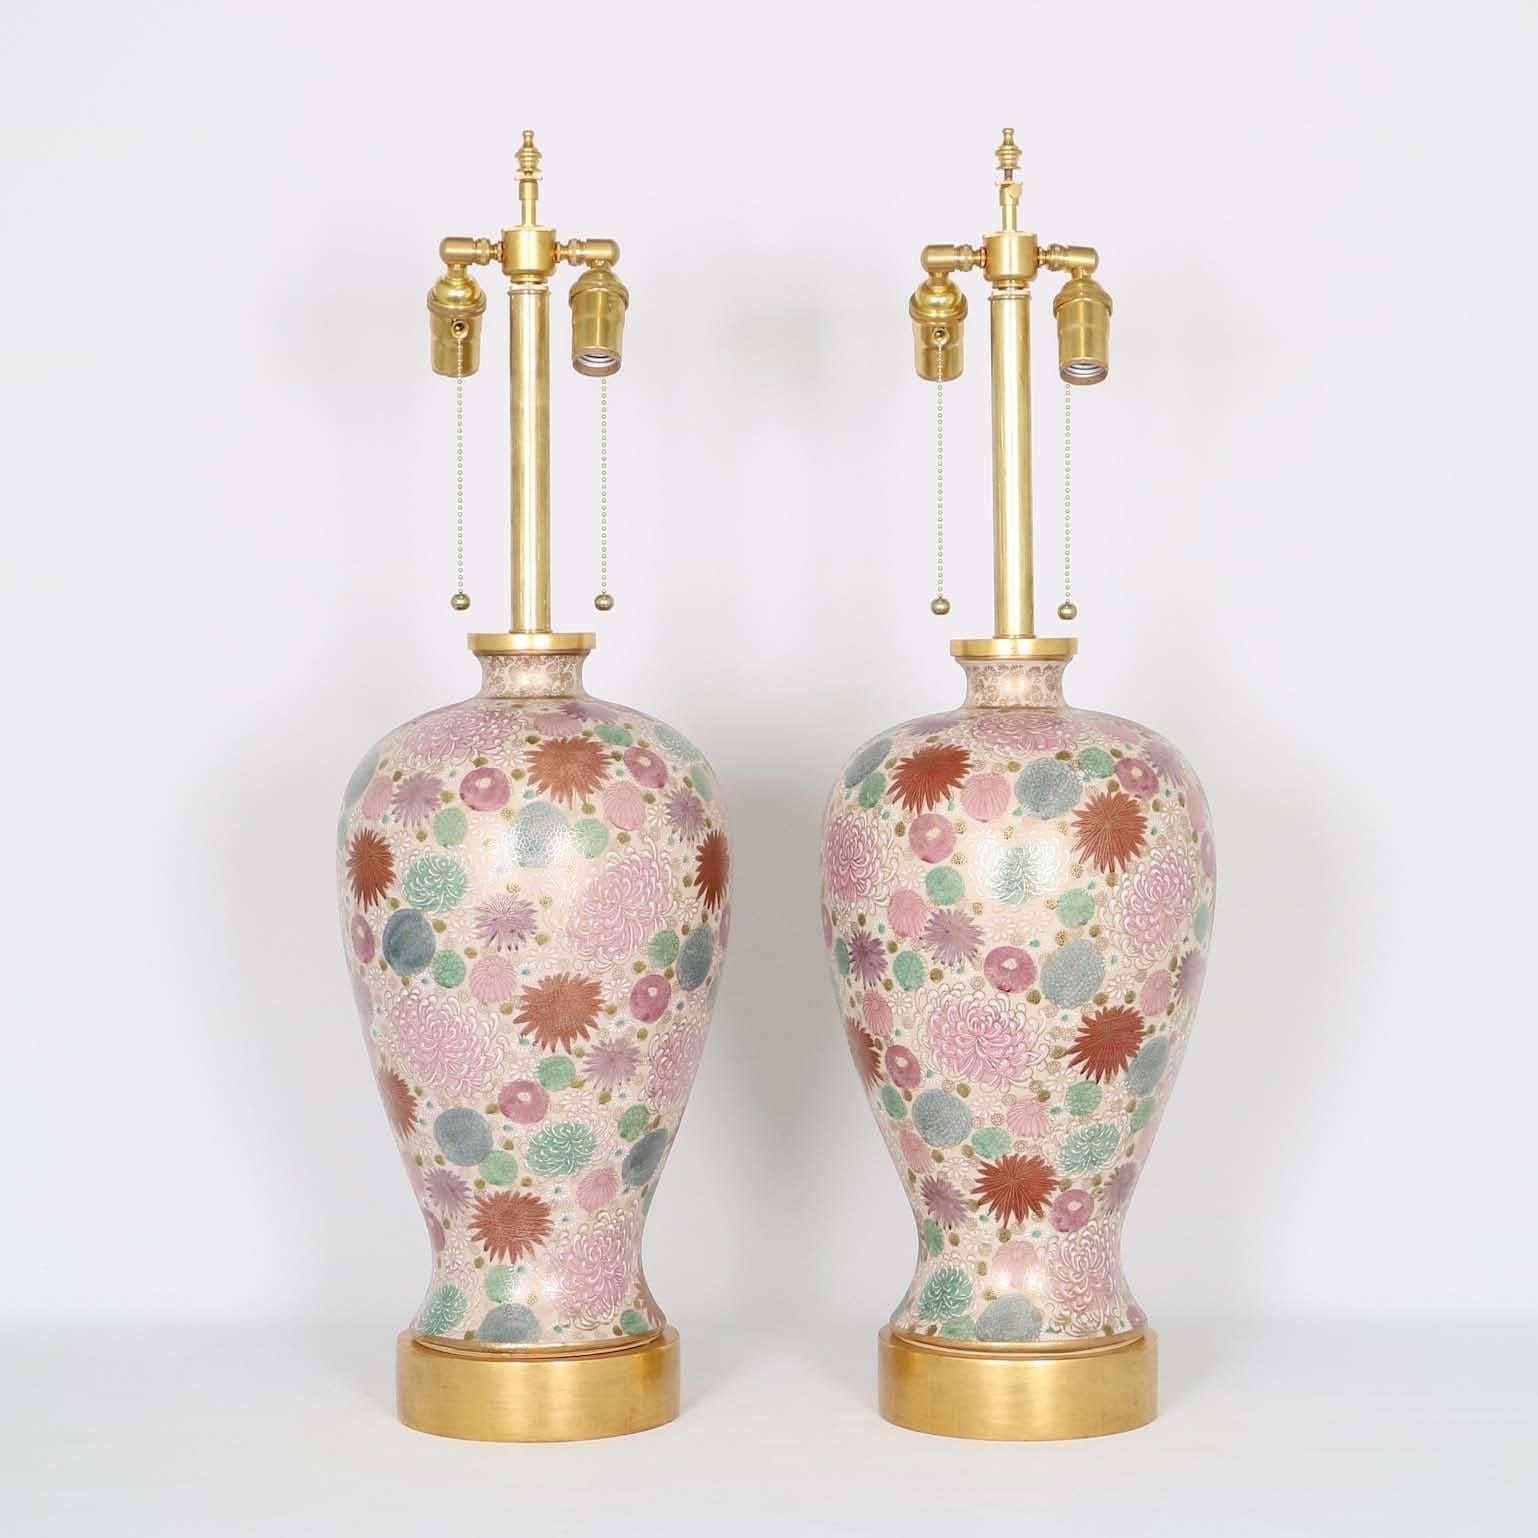 Mid-Century Modern pair of lamps with a hand painted floral motifs by Paul Hanson. The chrysanthemum motif in pink, lavender and pale blue makes this pattern unique. Mounted on wooden bases with caps in 24K gold gilding. The noted height is to the